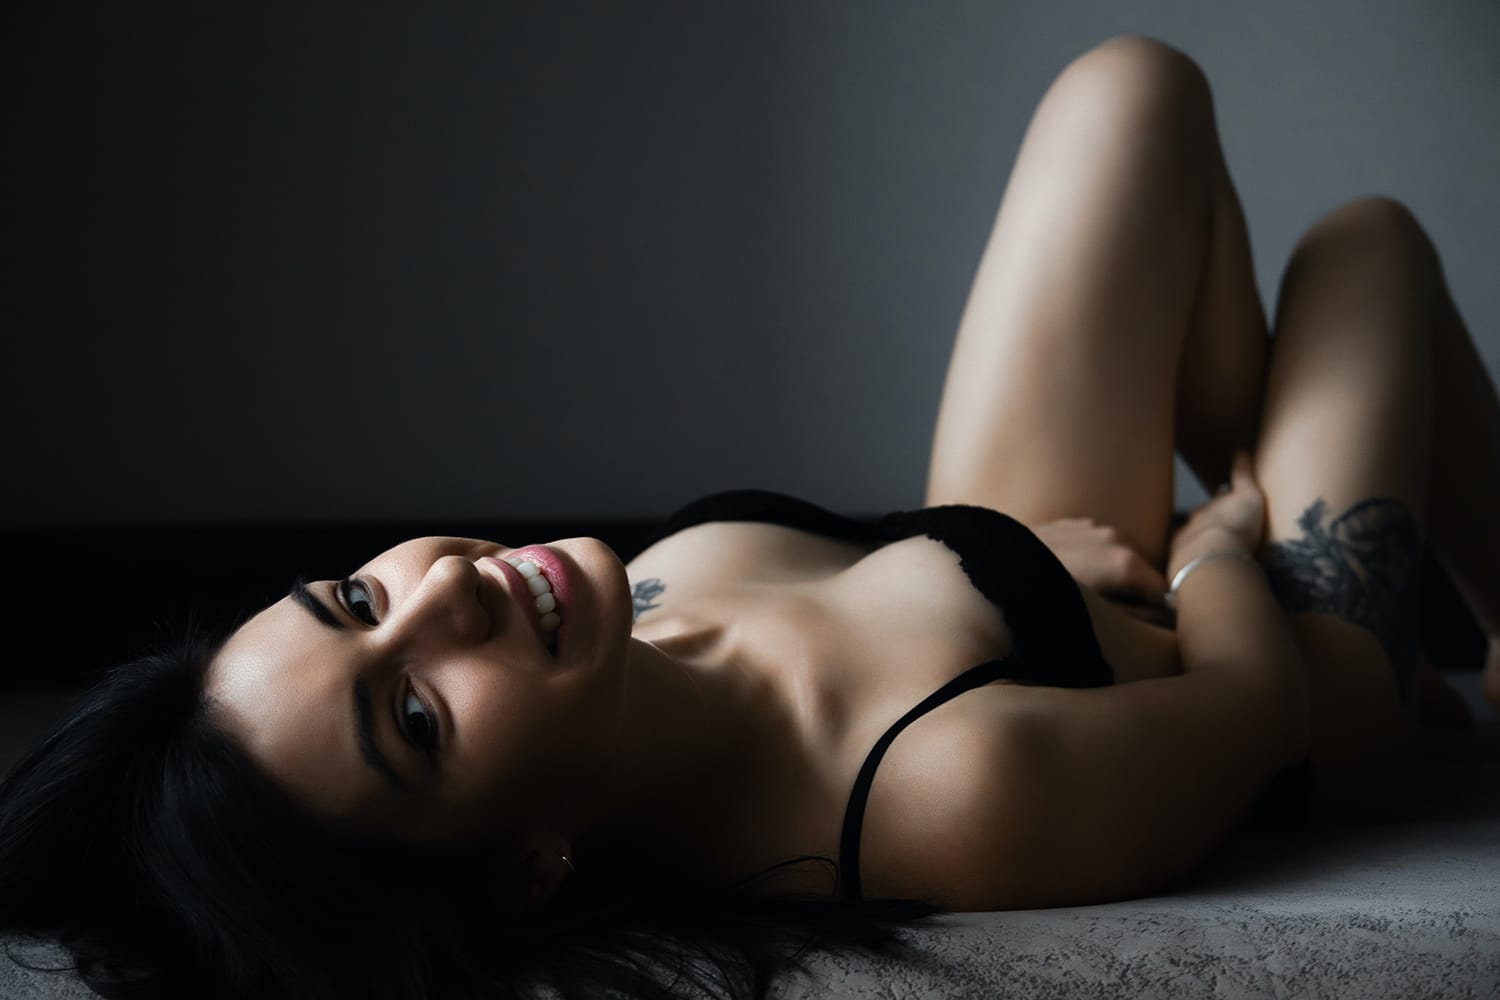 7 Tips For Capturing Gorgeous Boudoir Photos (And Making Your Client Feel Like a Million Bucks) Contrastly image